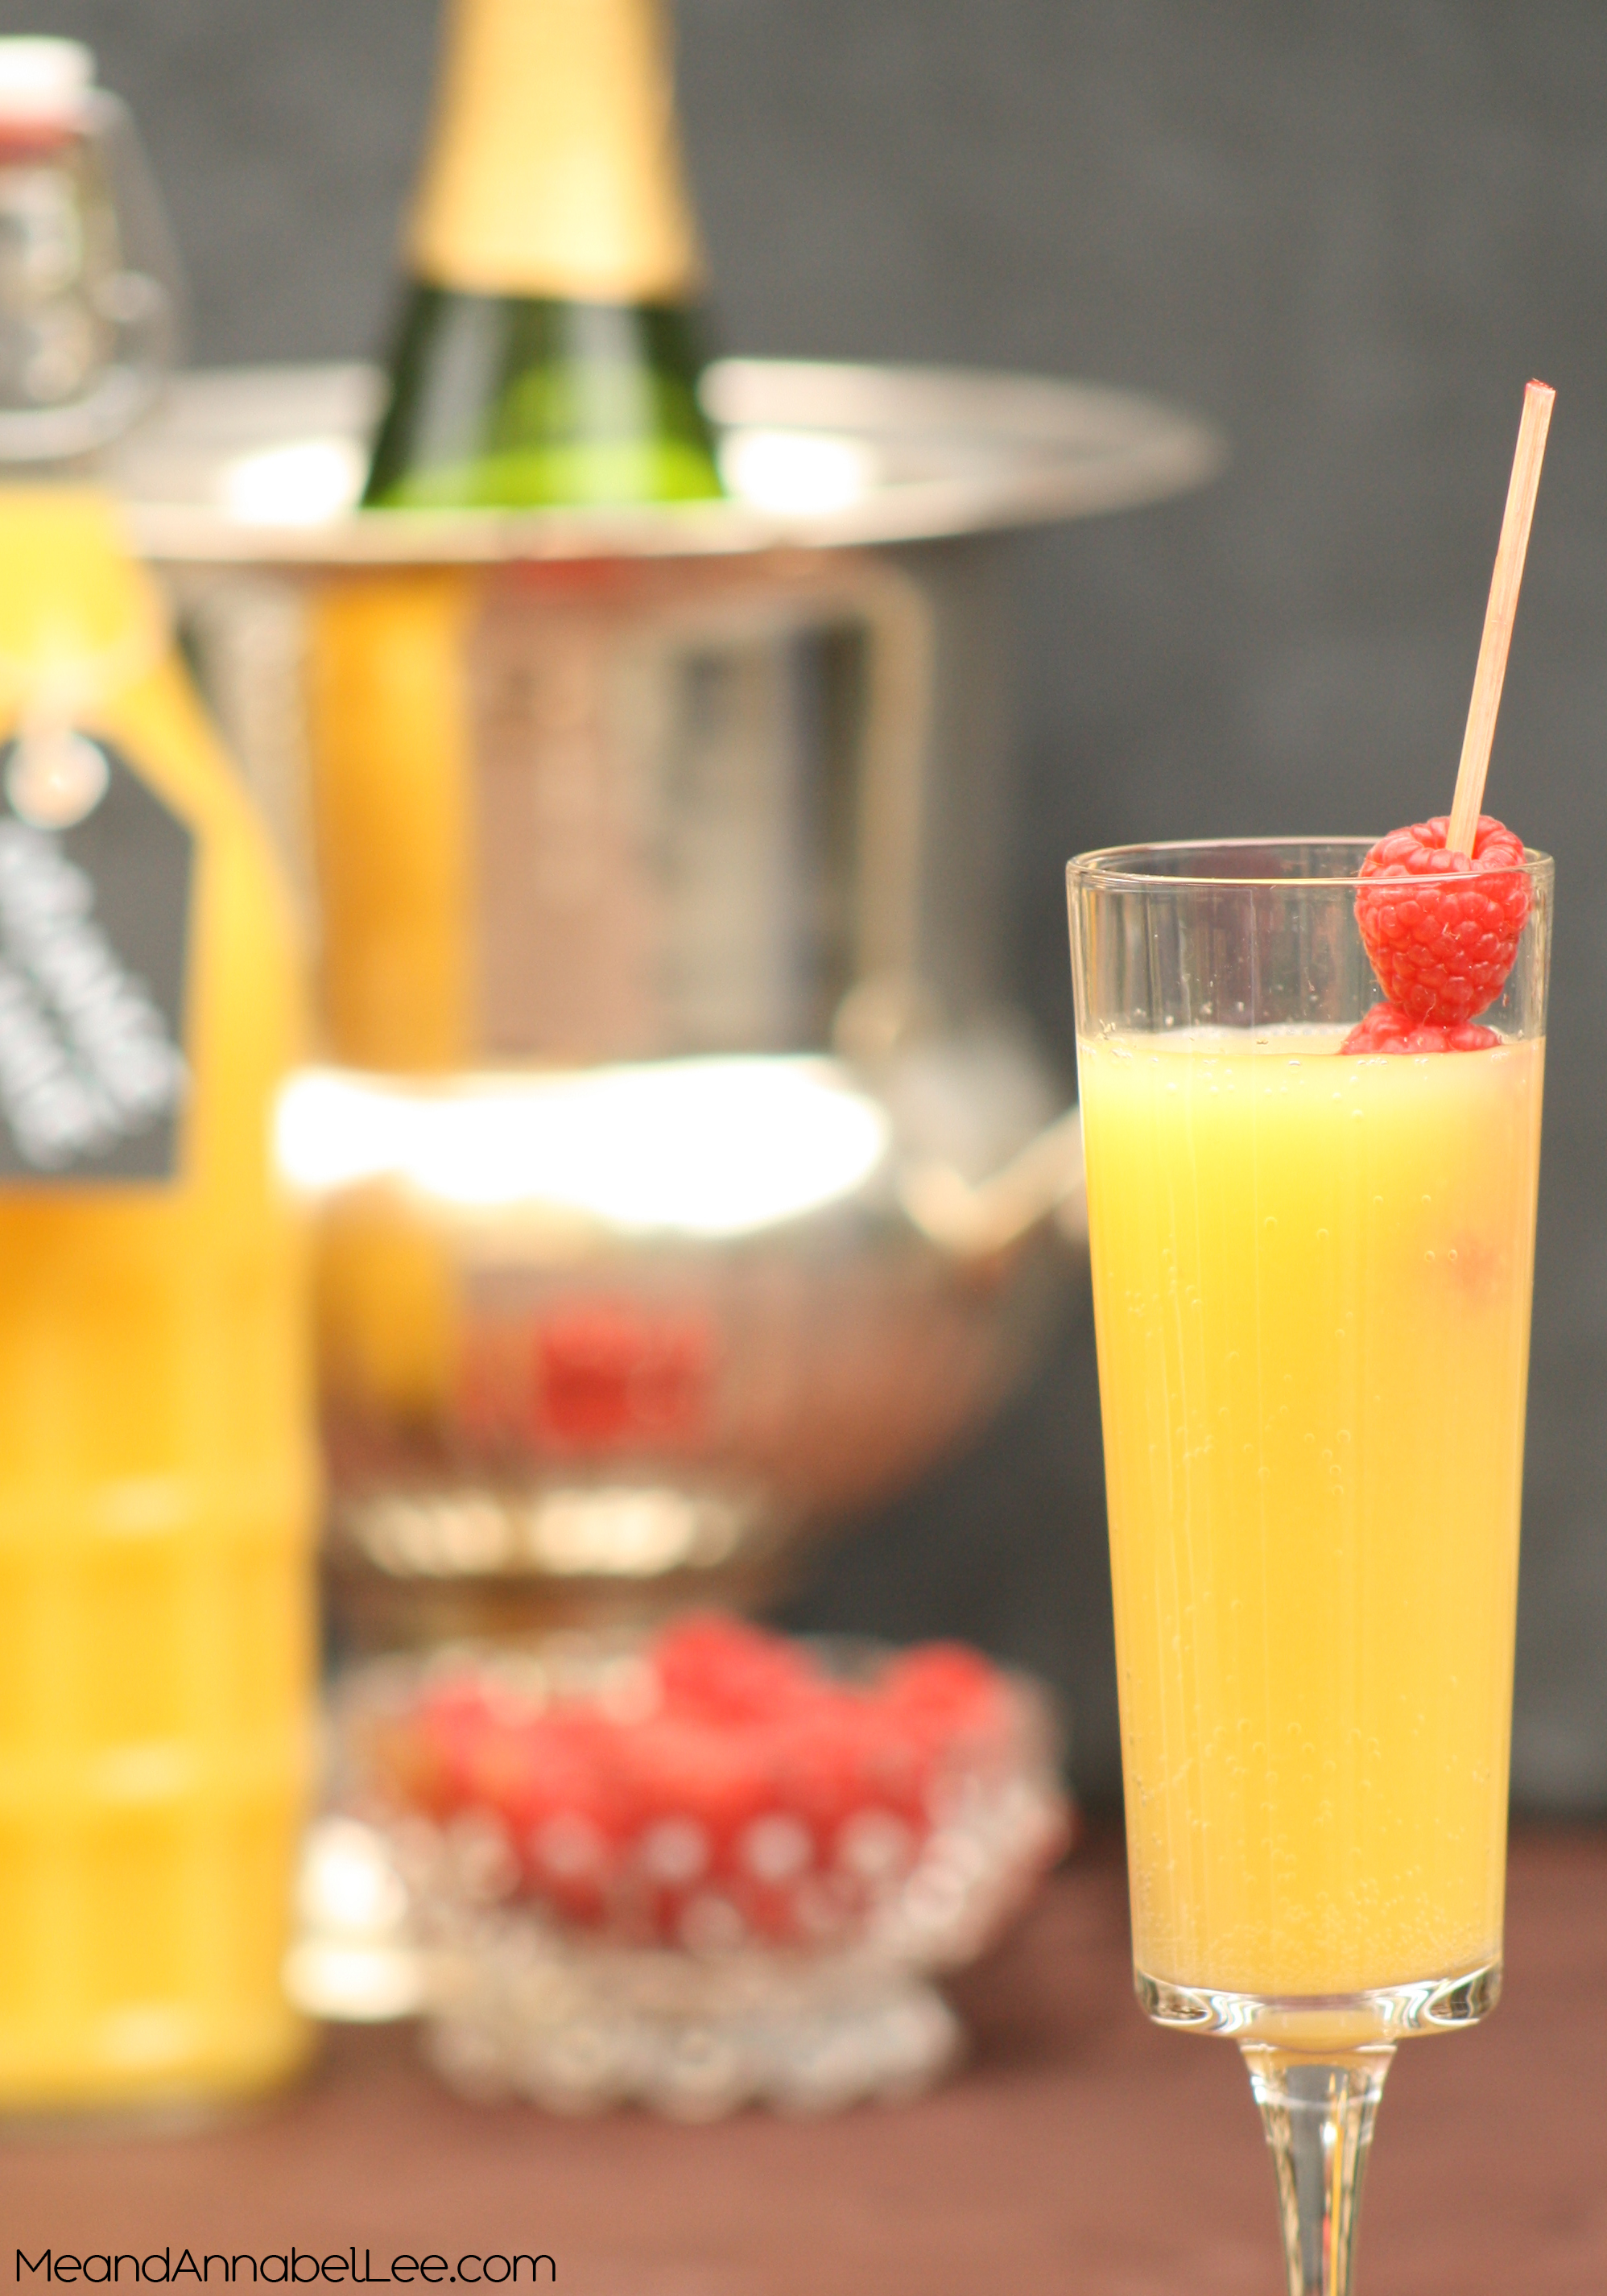 Mimosa Bar - Sunday Brunch - Traditional Mimosa with Frozen Raspberries - www.meandannabellee.com